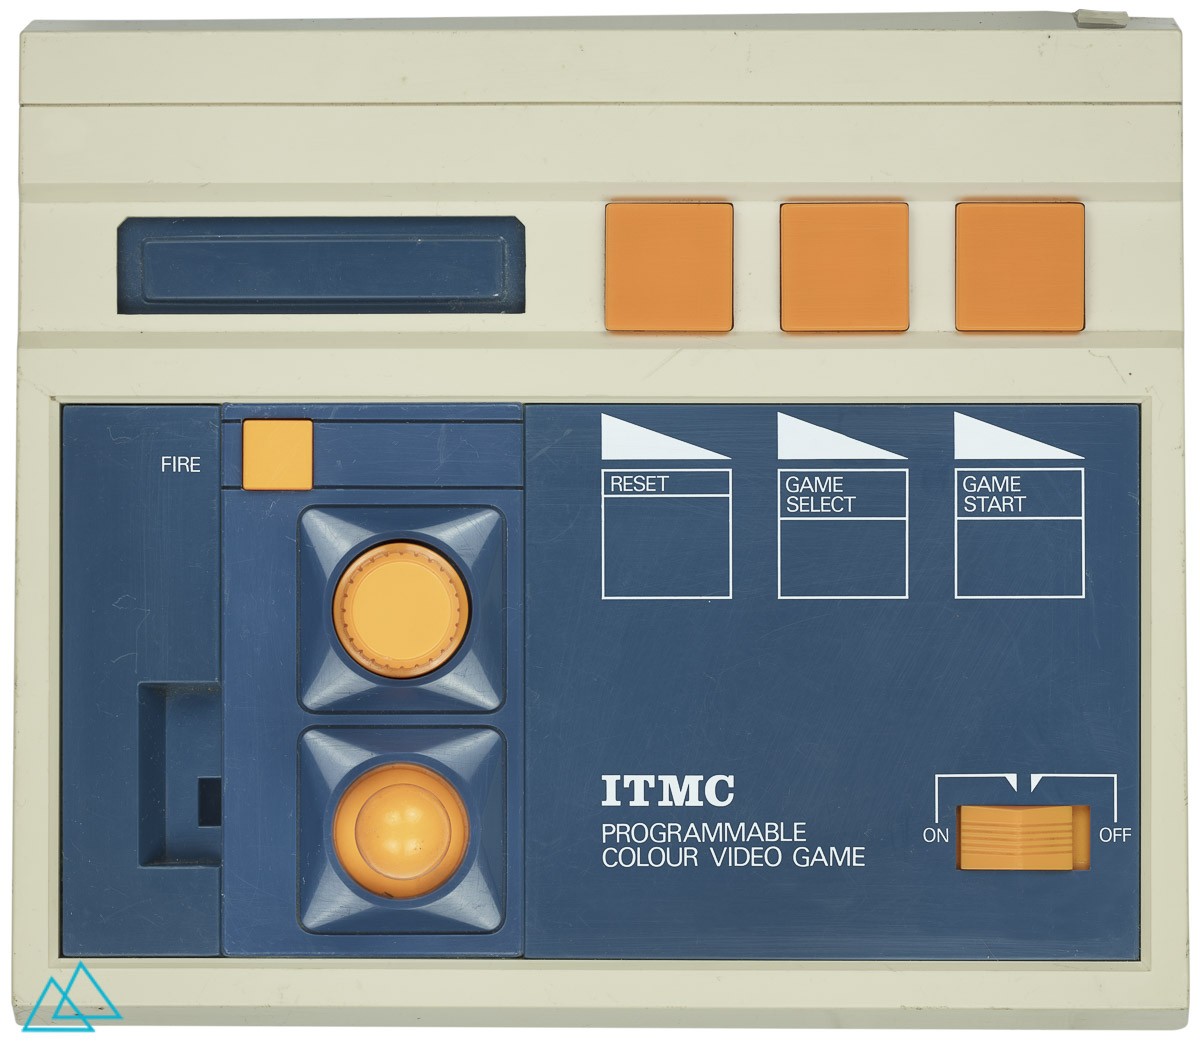 Video Game Console ITMC SD-290 Programmable Colour Video Game (Made by Soundic)